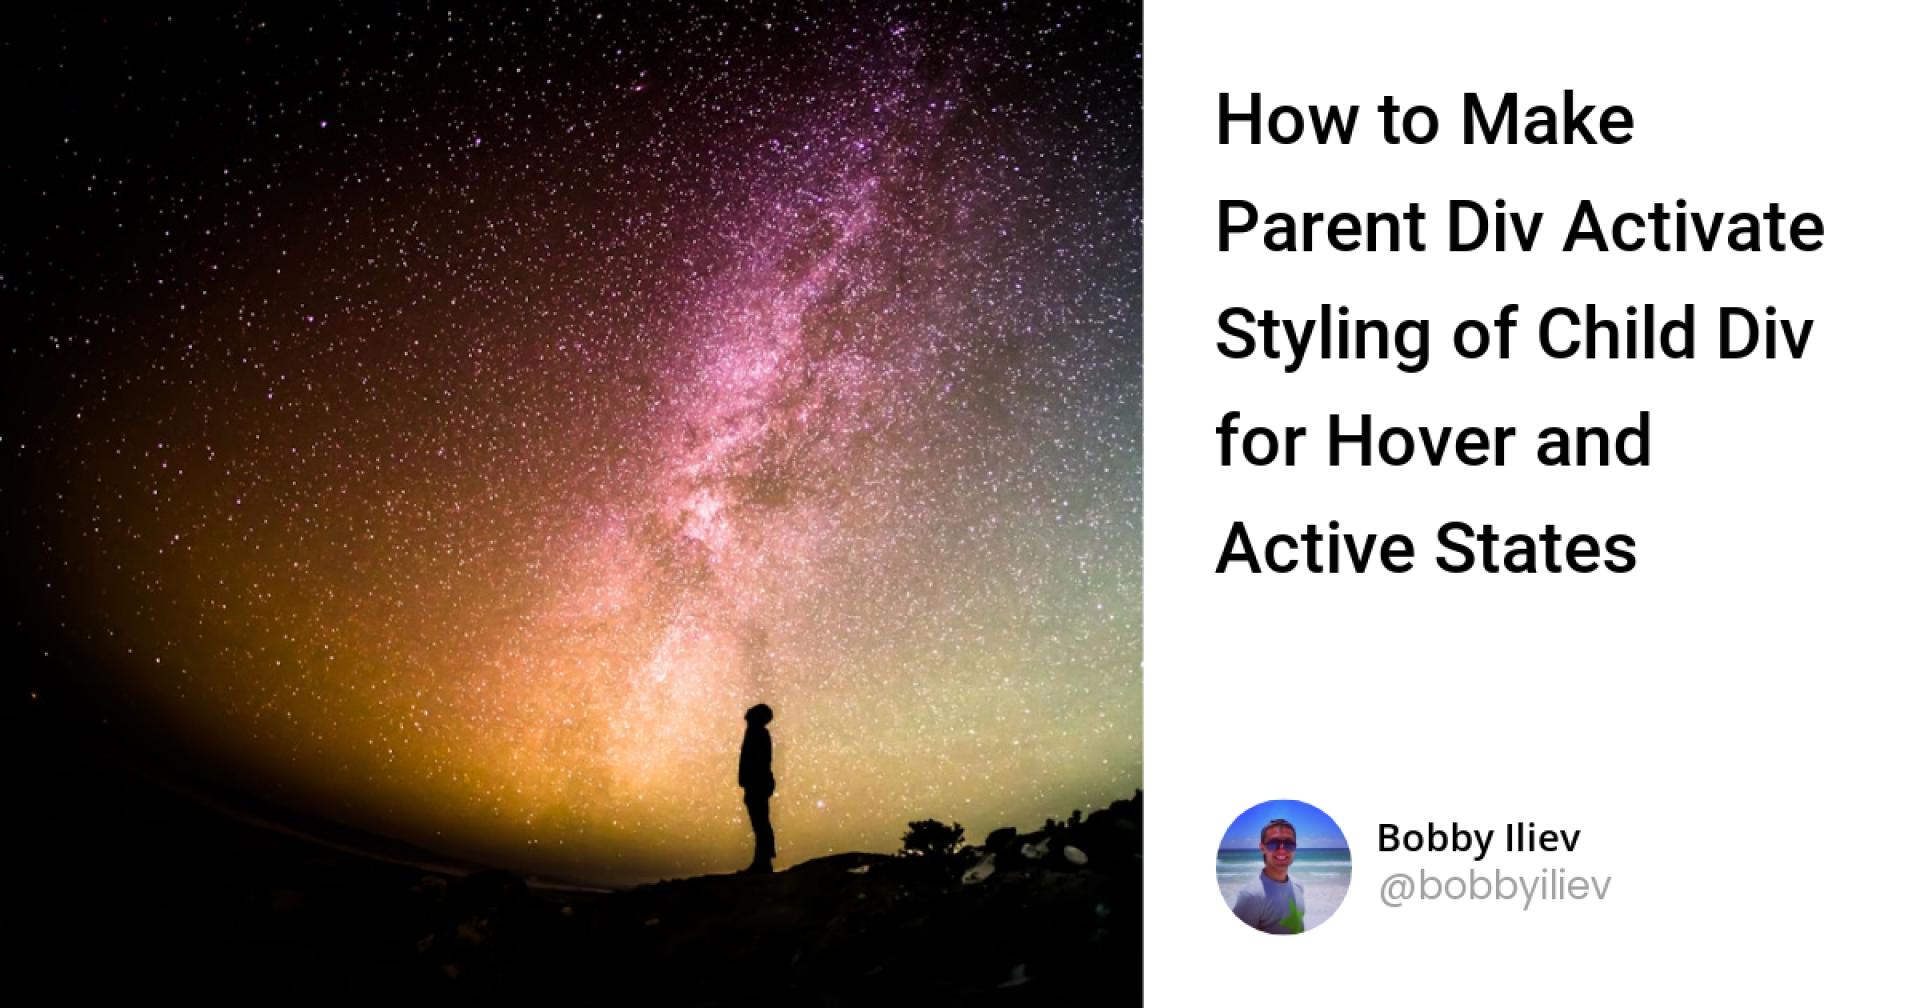 How to Make Parent Div Activate Styling of Child Div for Hover and Active States